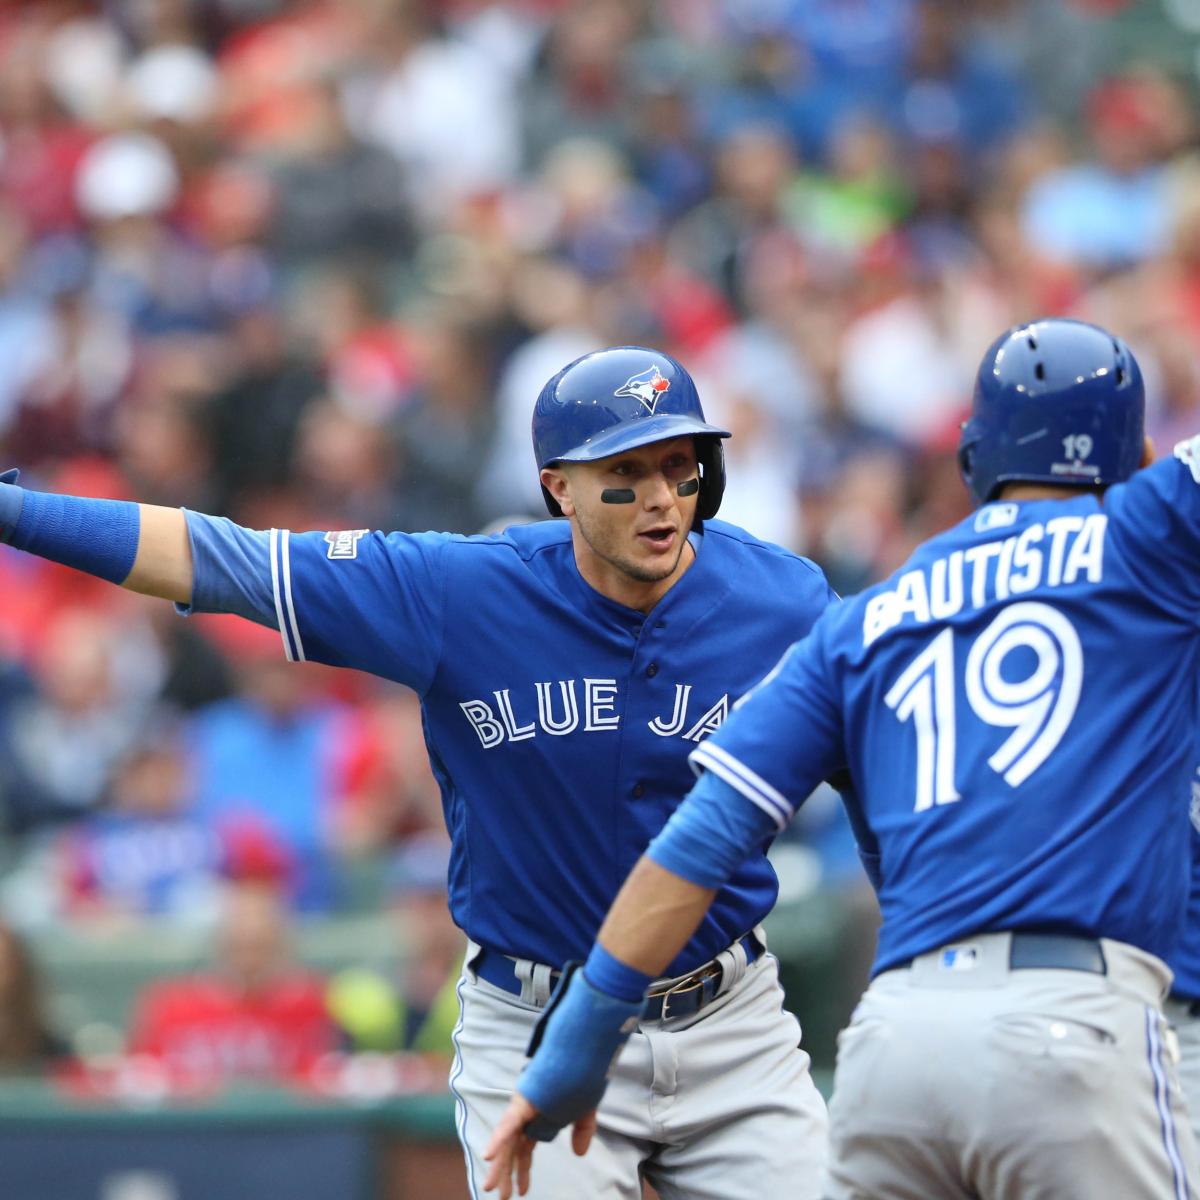 Blue Jays: Kevin Pillar and Russell Martin Man Up in Brawl